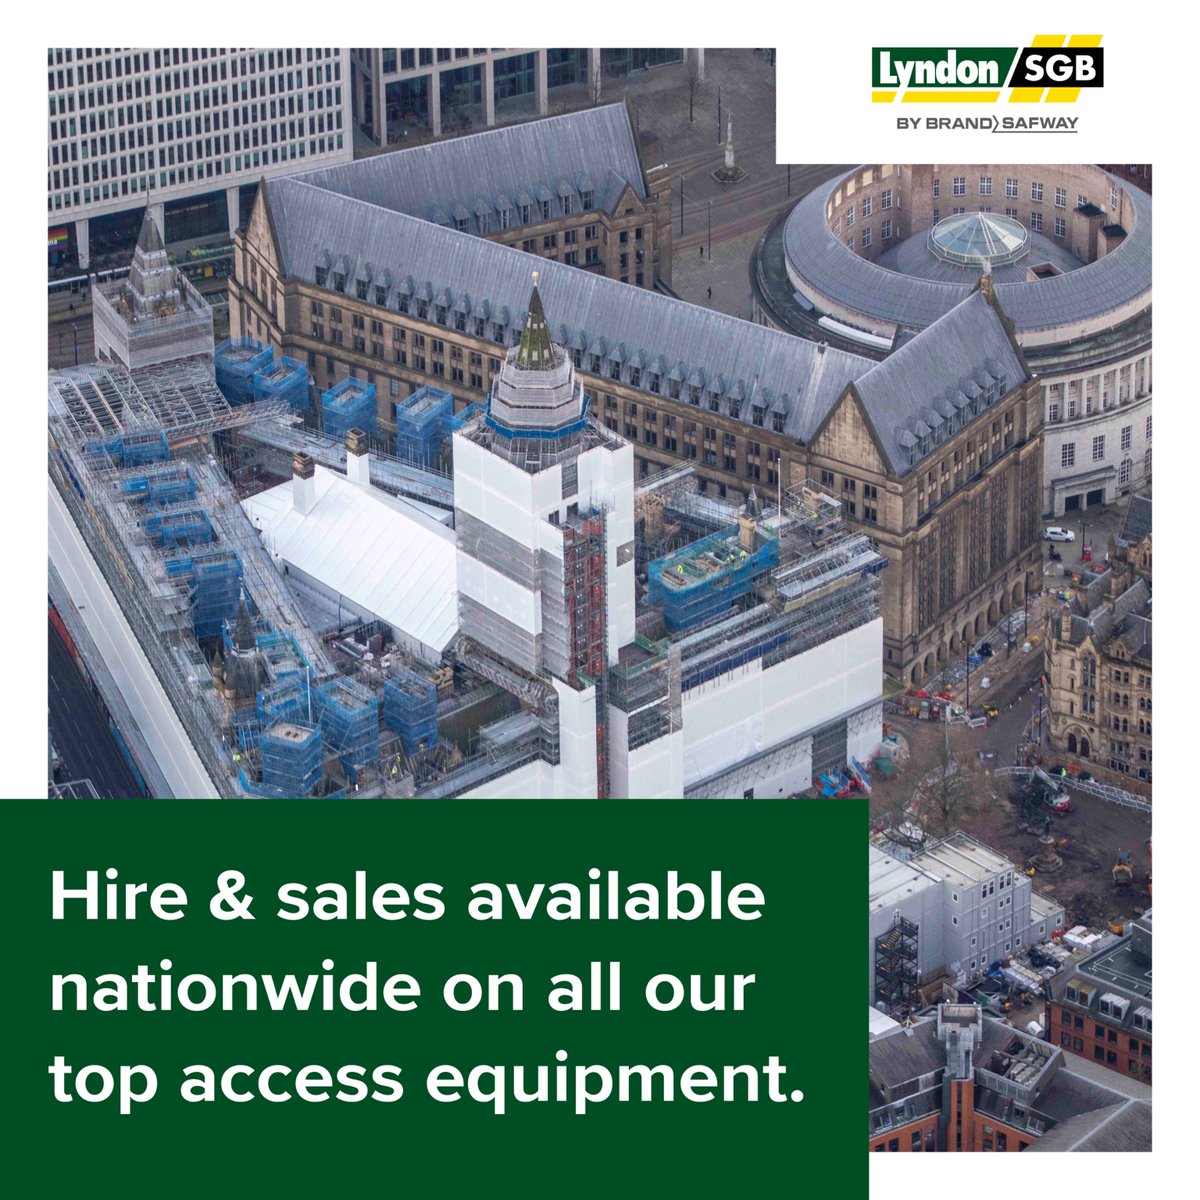 Look at the scale of our hybrid access works at Manchester #OurTownHall. Huge right? ✊🏻 But did you know? The vast amount of #access & #scaffolding products is also available to hire or buy via our nationwide #hireandsales team? 🤔 📧 info@lyndon-sgb.co.uk #LyndonSGB #WeAreOne